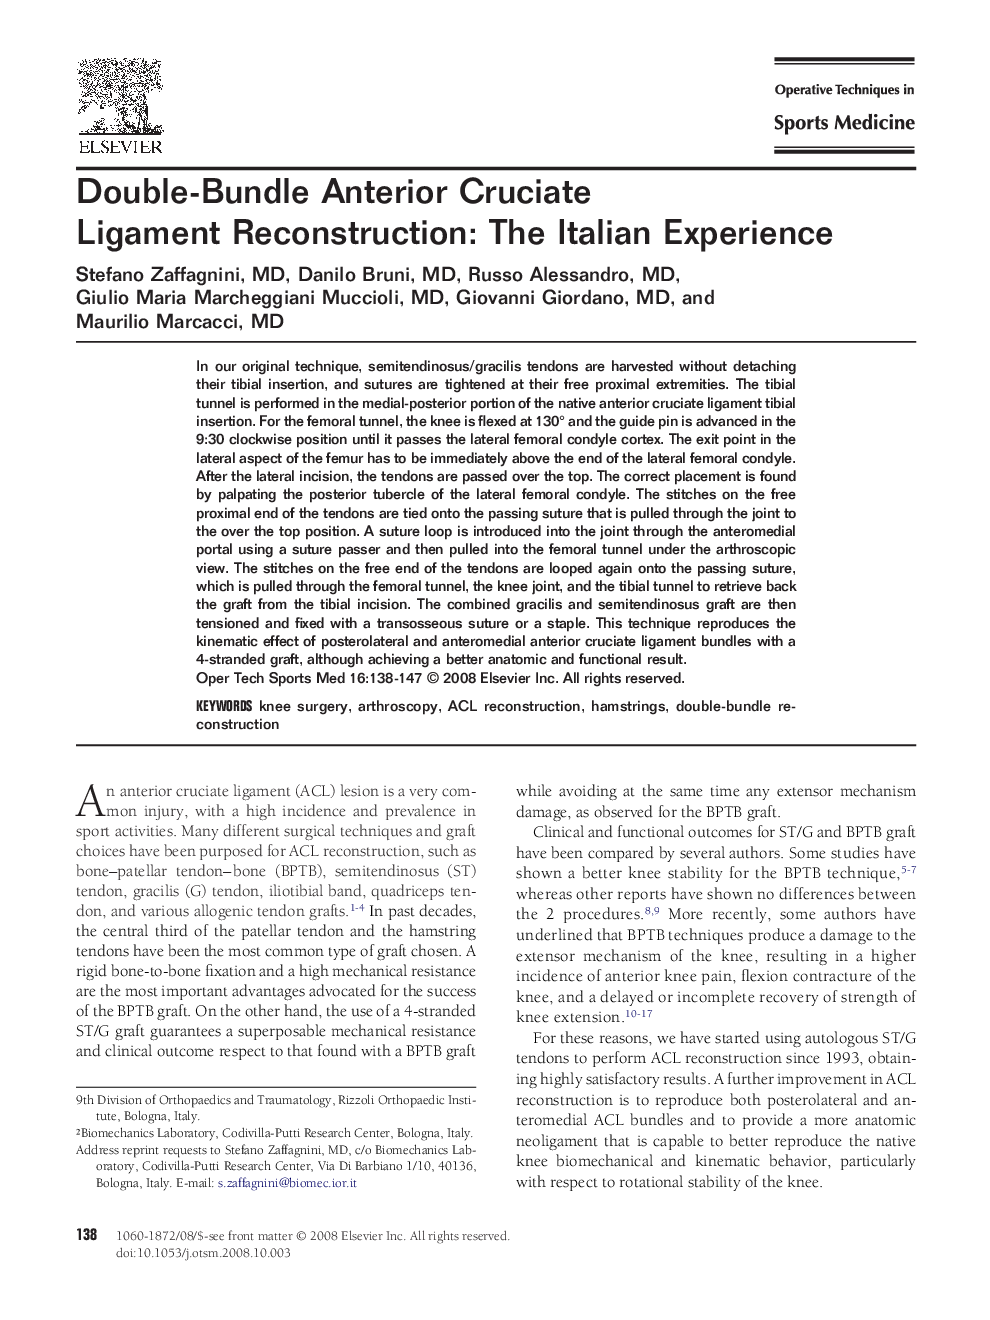 Double-Bundle Anterior Cruciate Ligament Reconstruction: The Italian Experience